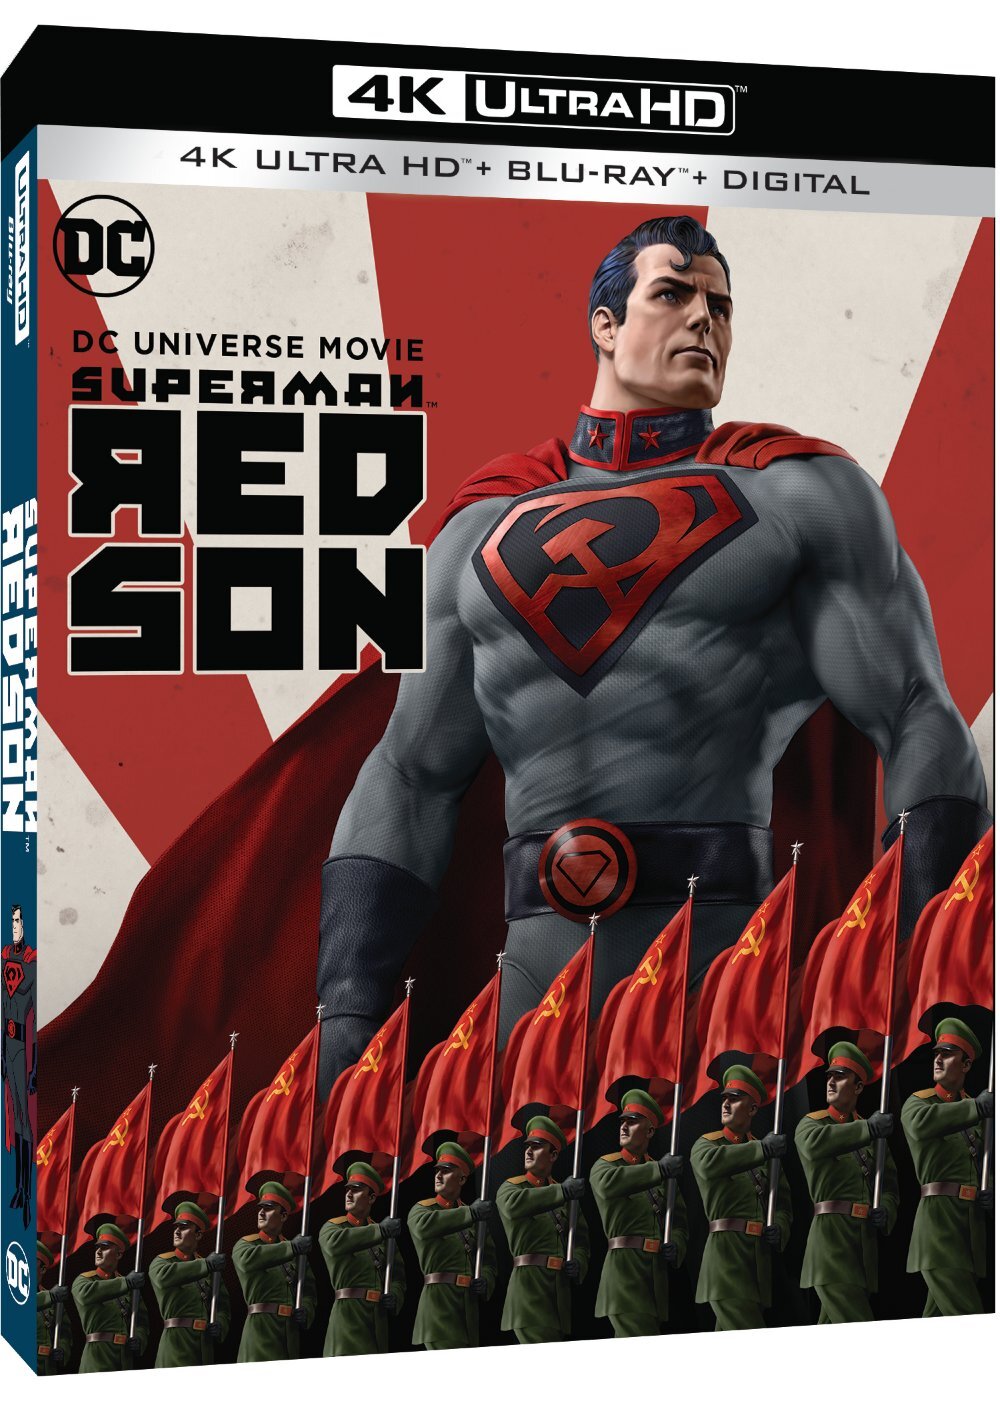 WARNER BROS. HOME ENTERTAINMENT AND DC PRESENT  BELOVED ELSEWORLDS TALE SUPERMAN: RED SON